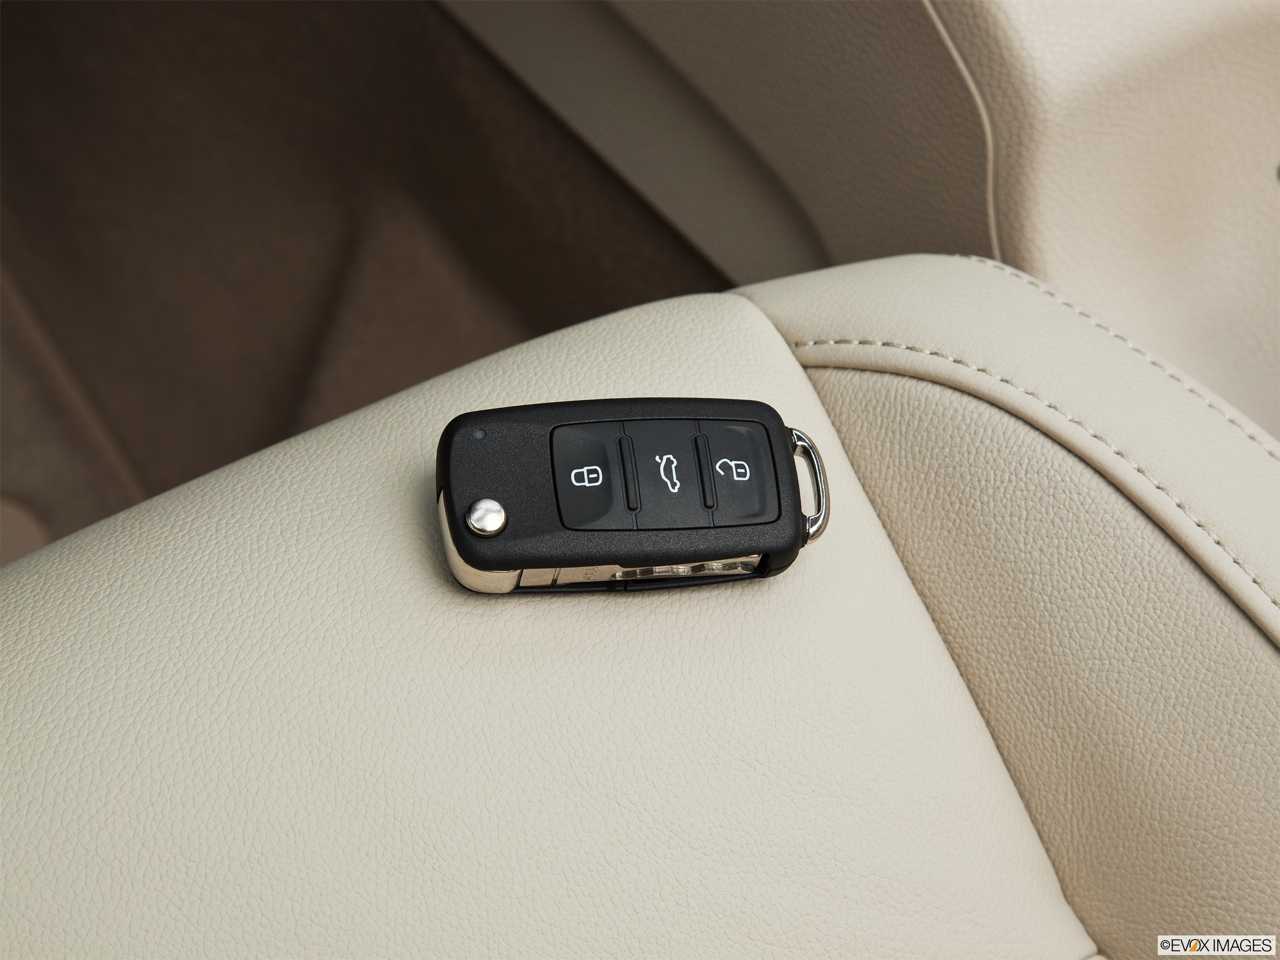 2011 Volkswagen Eos Lux Key fob on driver's seat. 